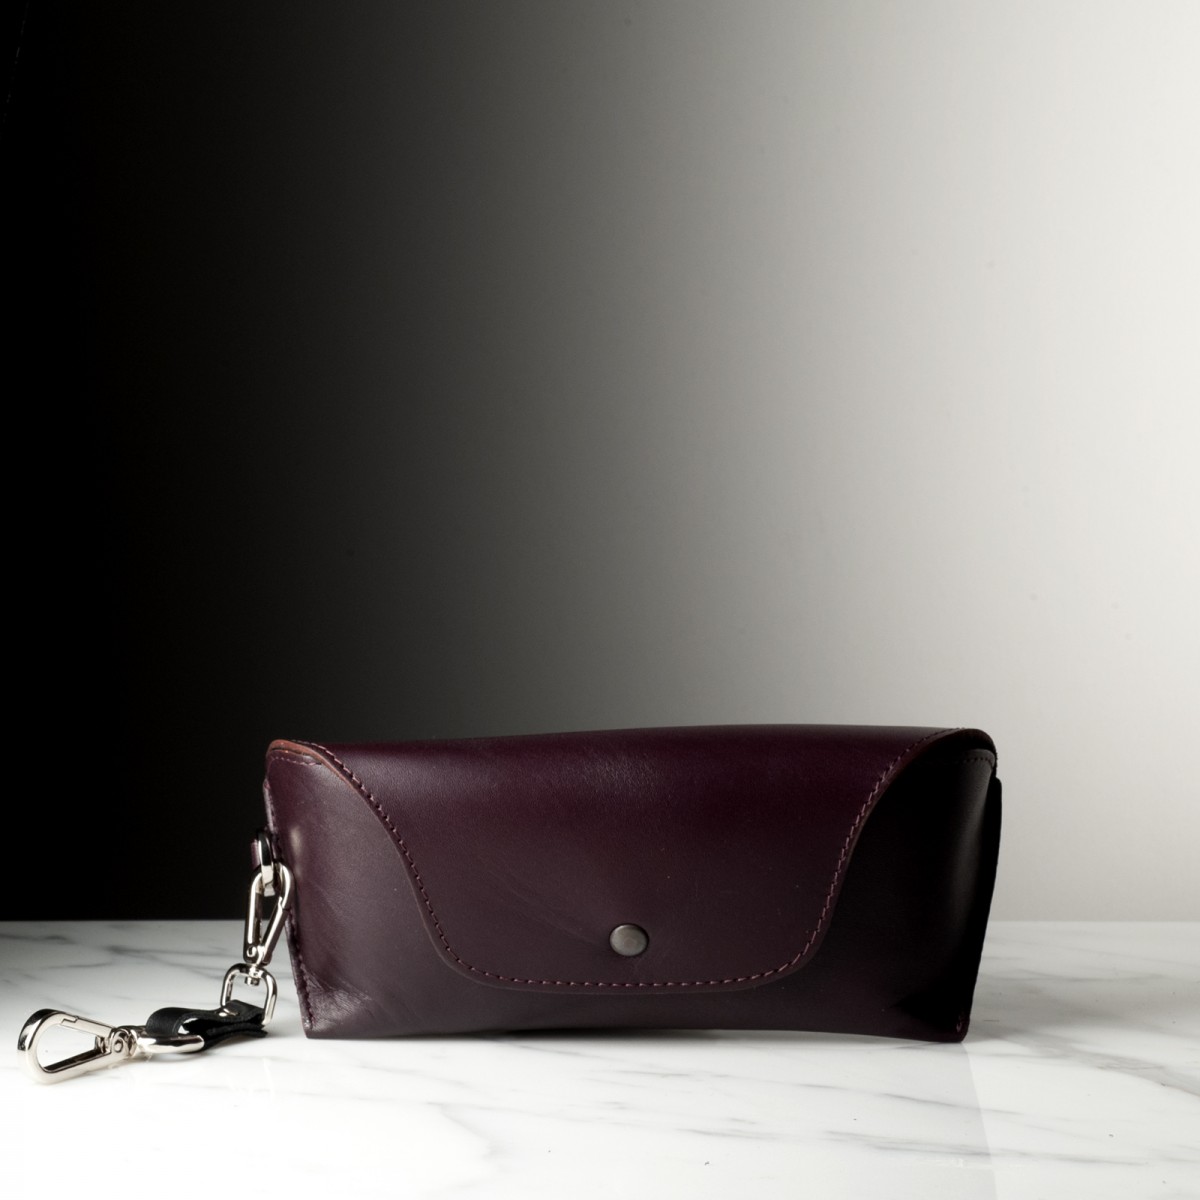 MILENA - Handcrafted leather case made in Italy